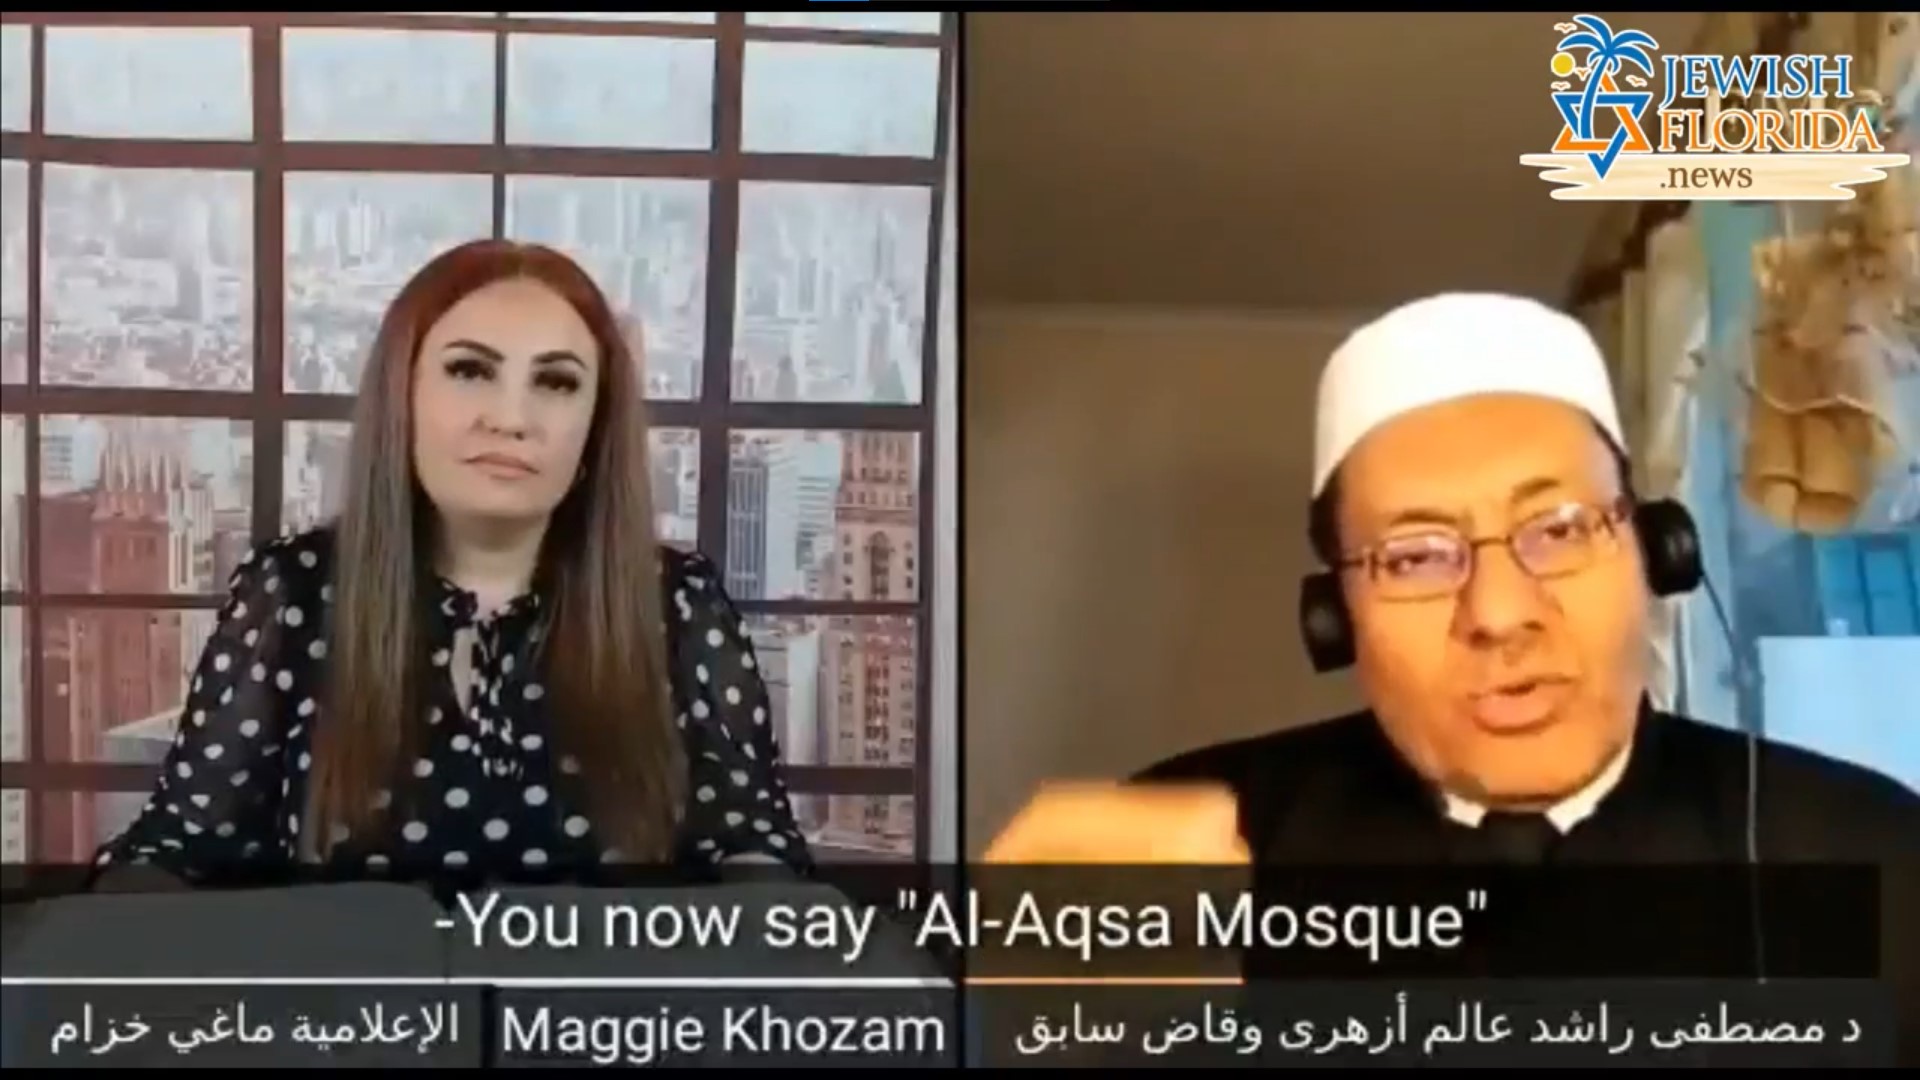 Muslims Discover Al-Aqsa Mosque is Not Where They Thought